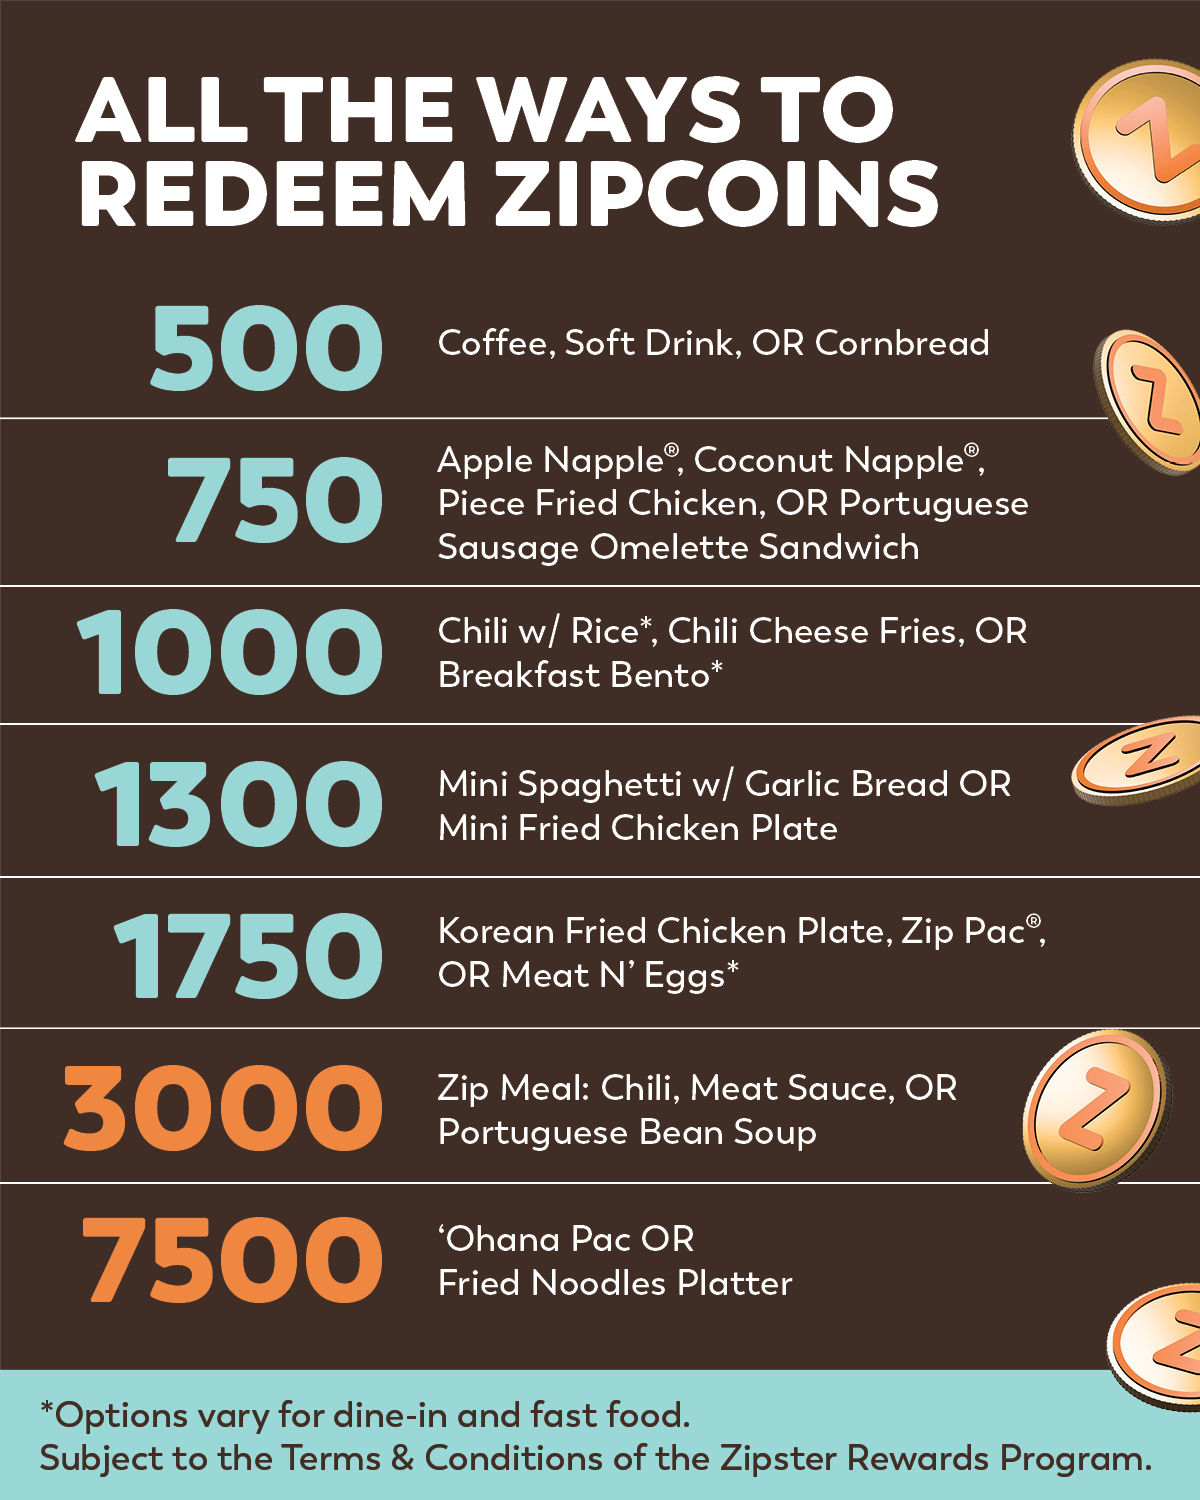 All the ways to redeem Zipcoins